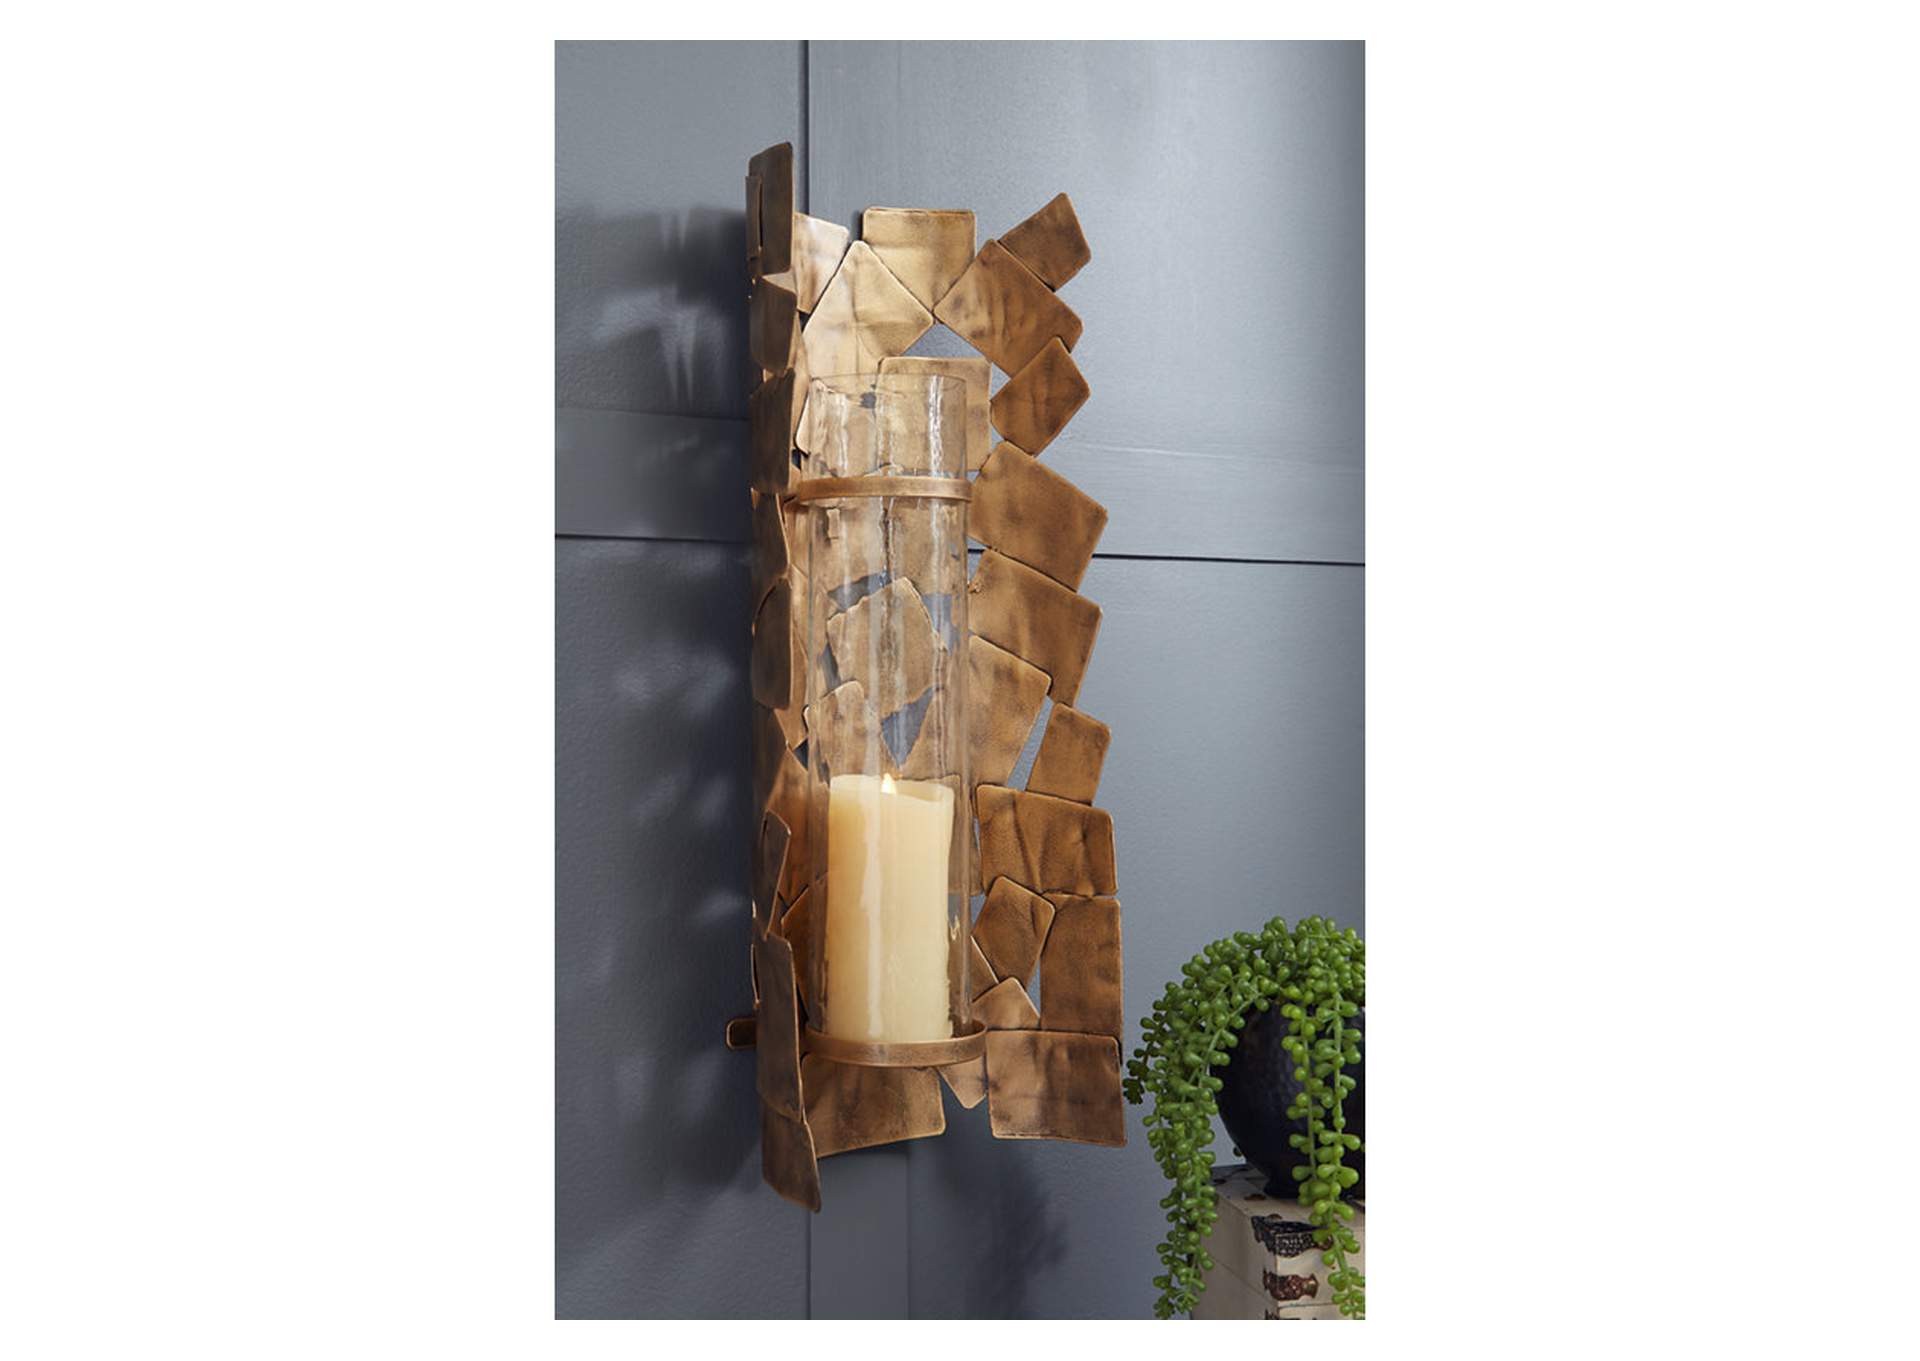 Jailene Wall Sconce,Direct To Consumer Express